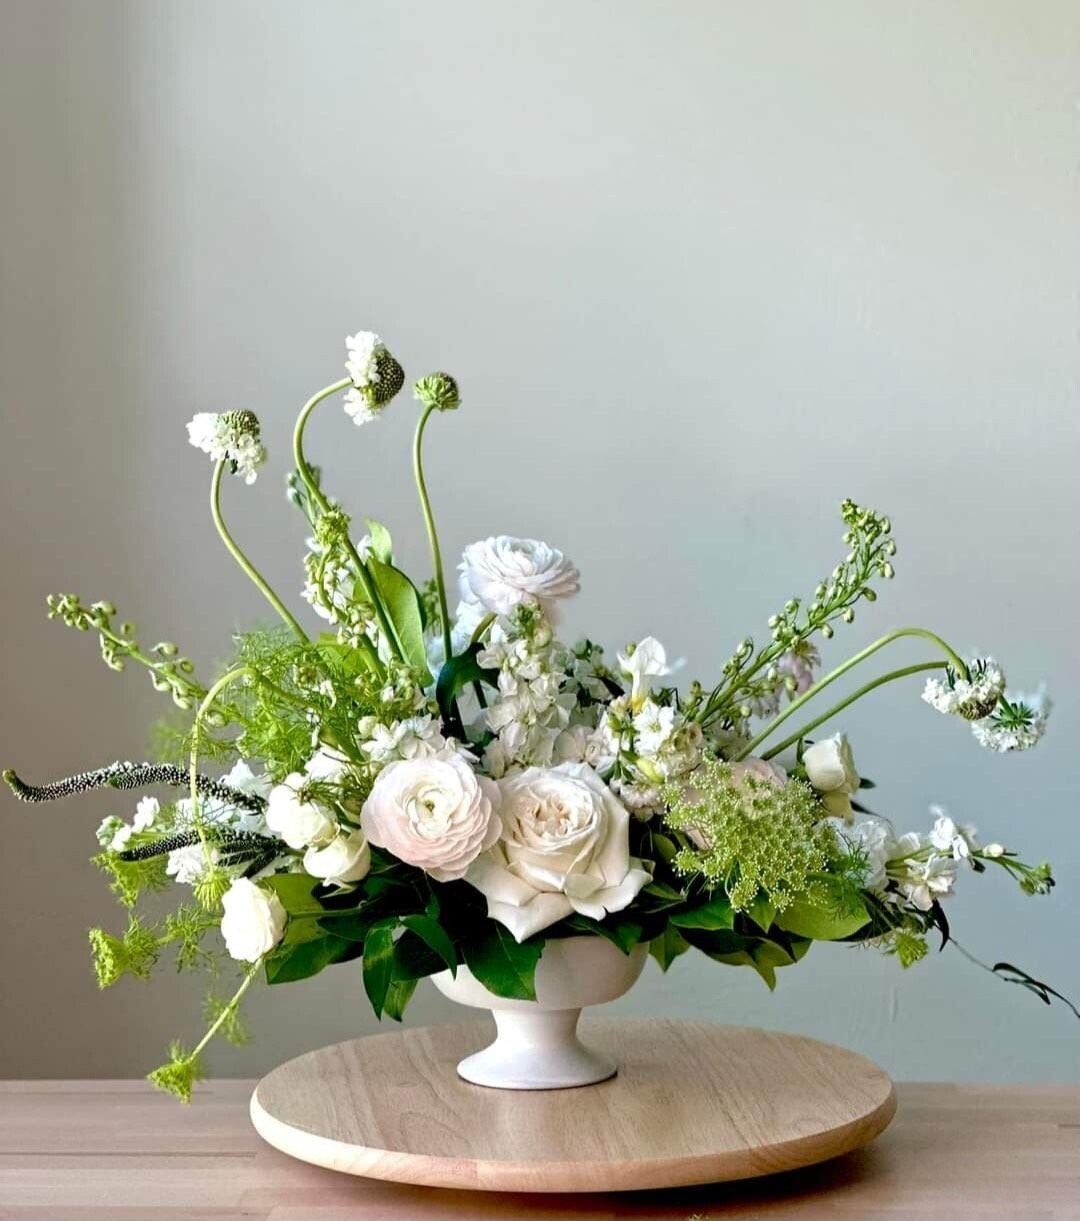 Ethereal Elegance: White & Green Garden Style Compote Arrangement